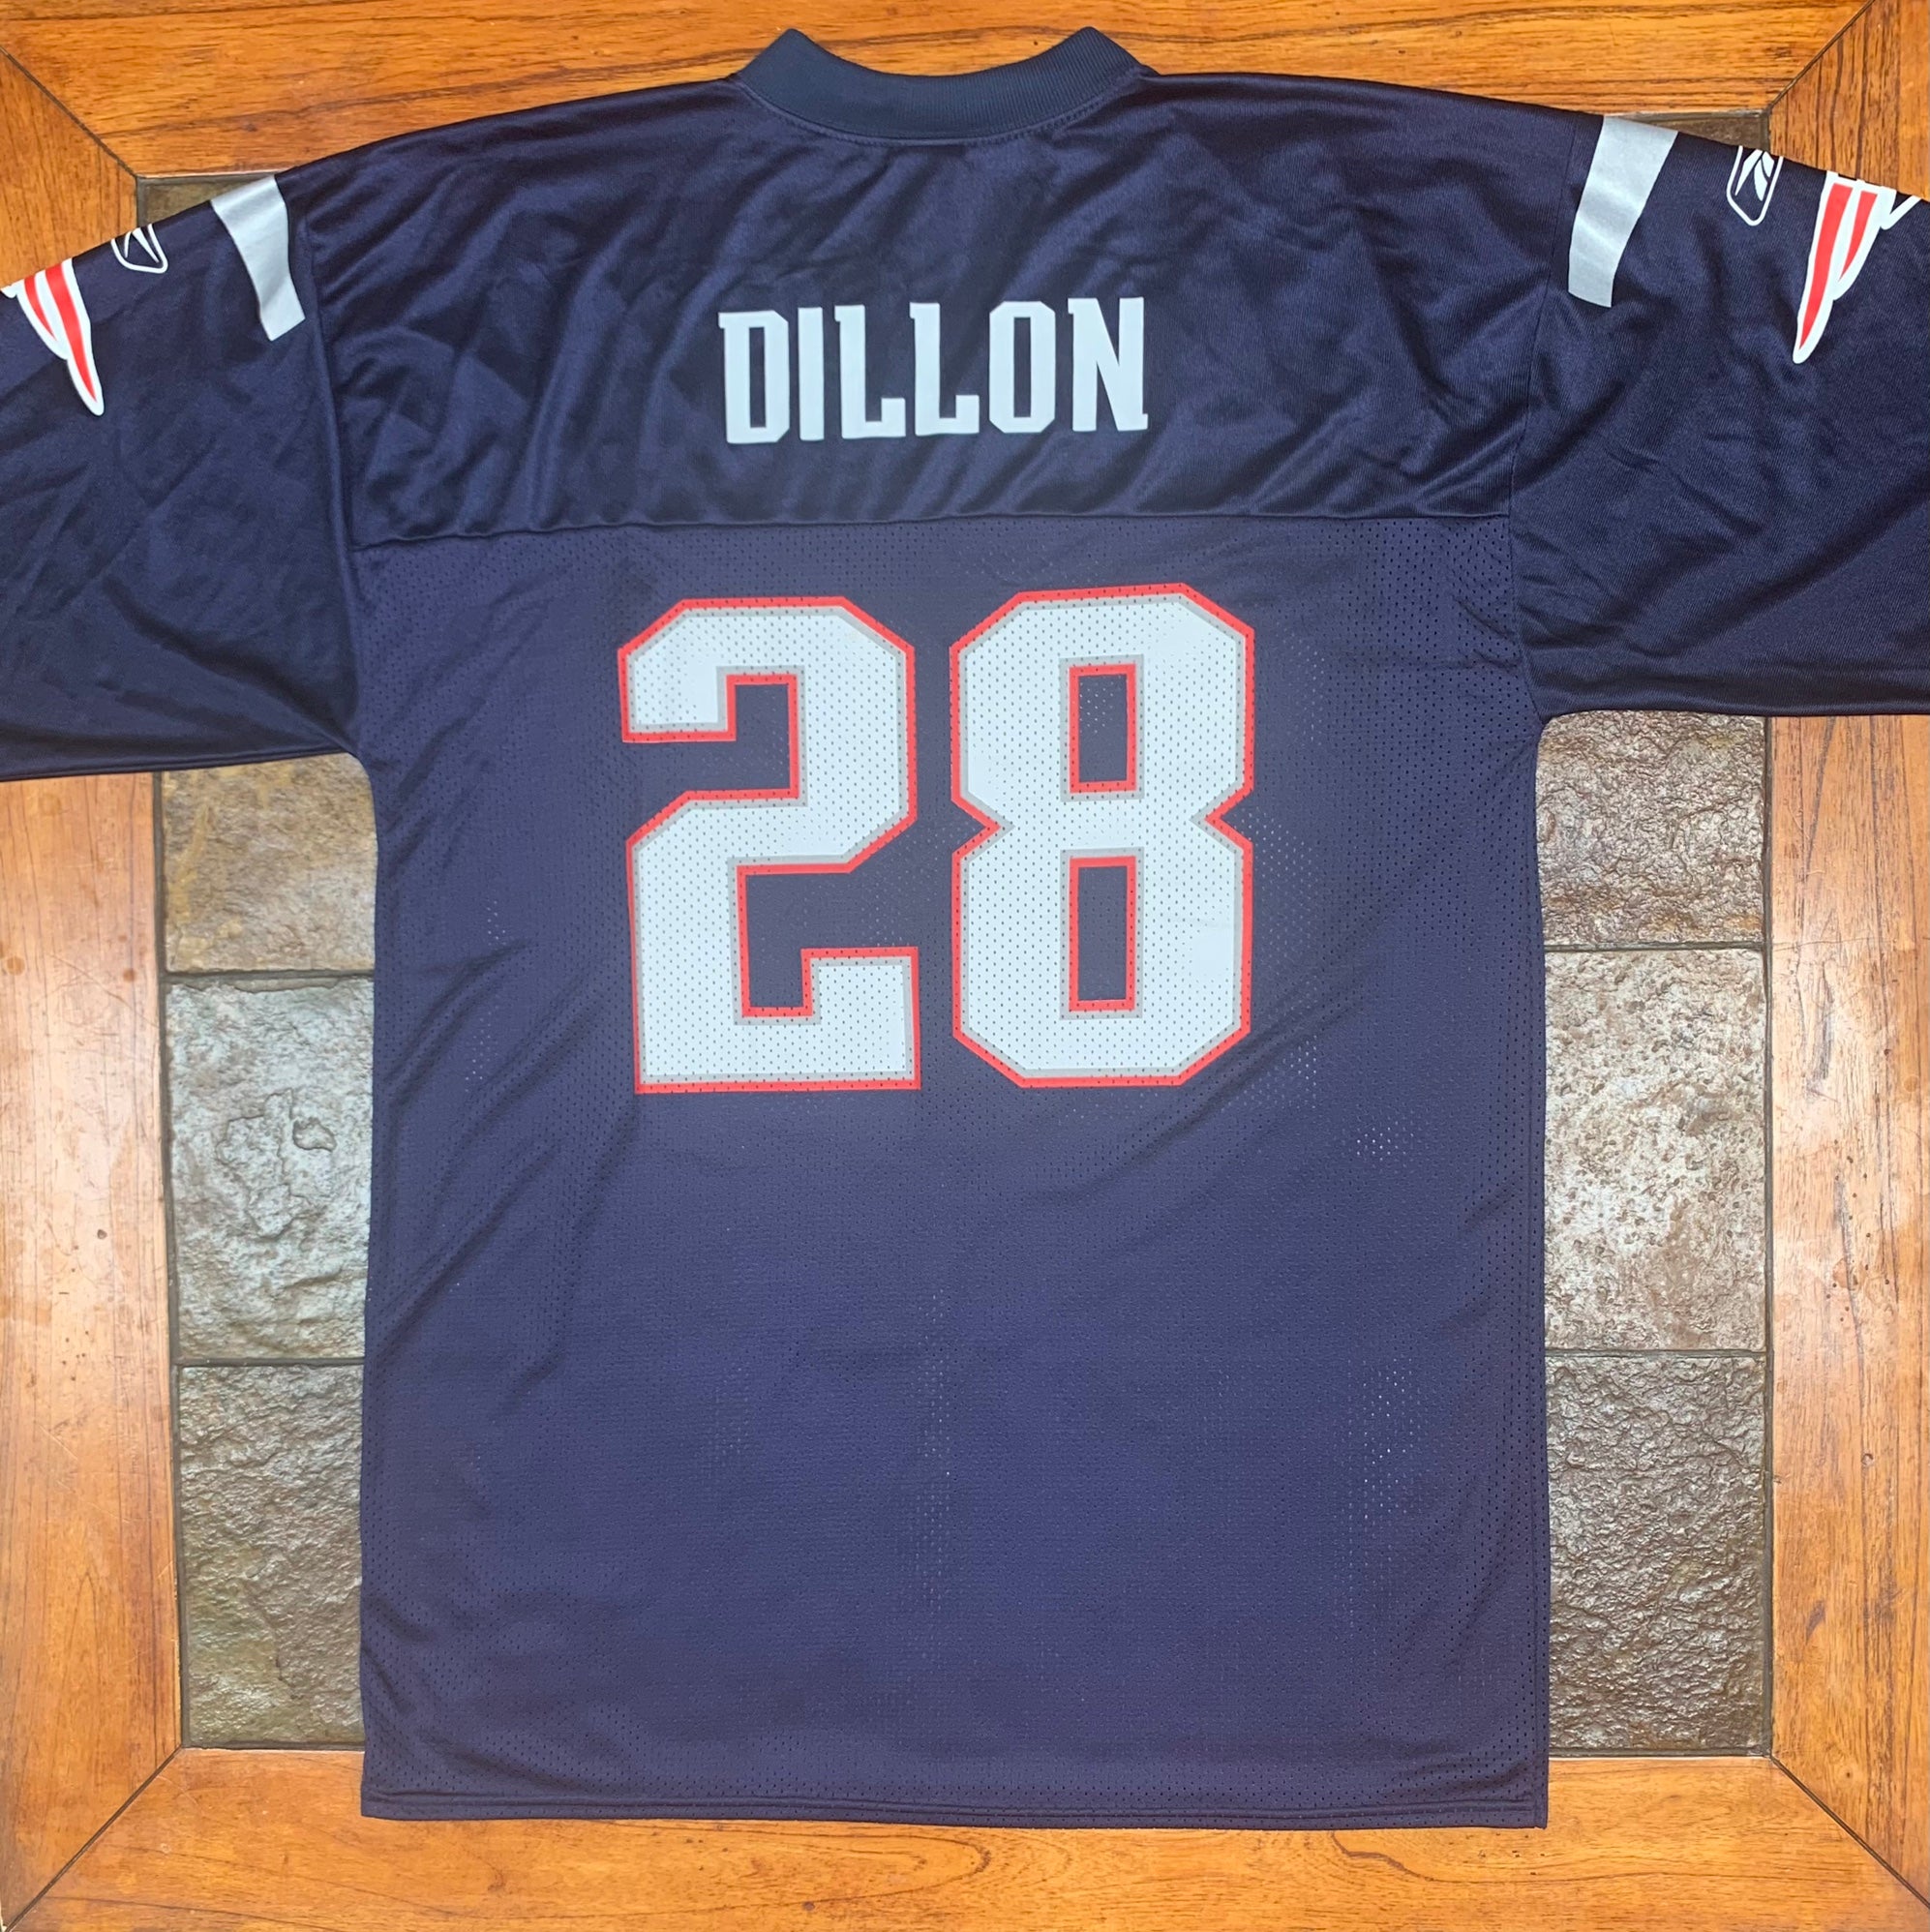 New England Patriots Game Used NFL Jerseys for sale